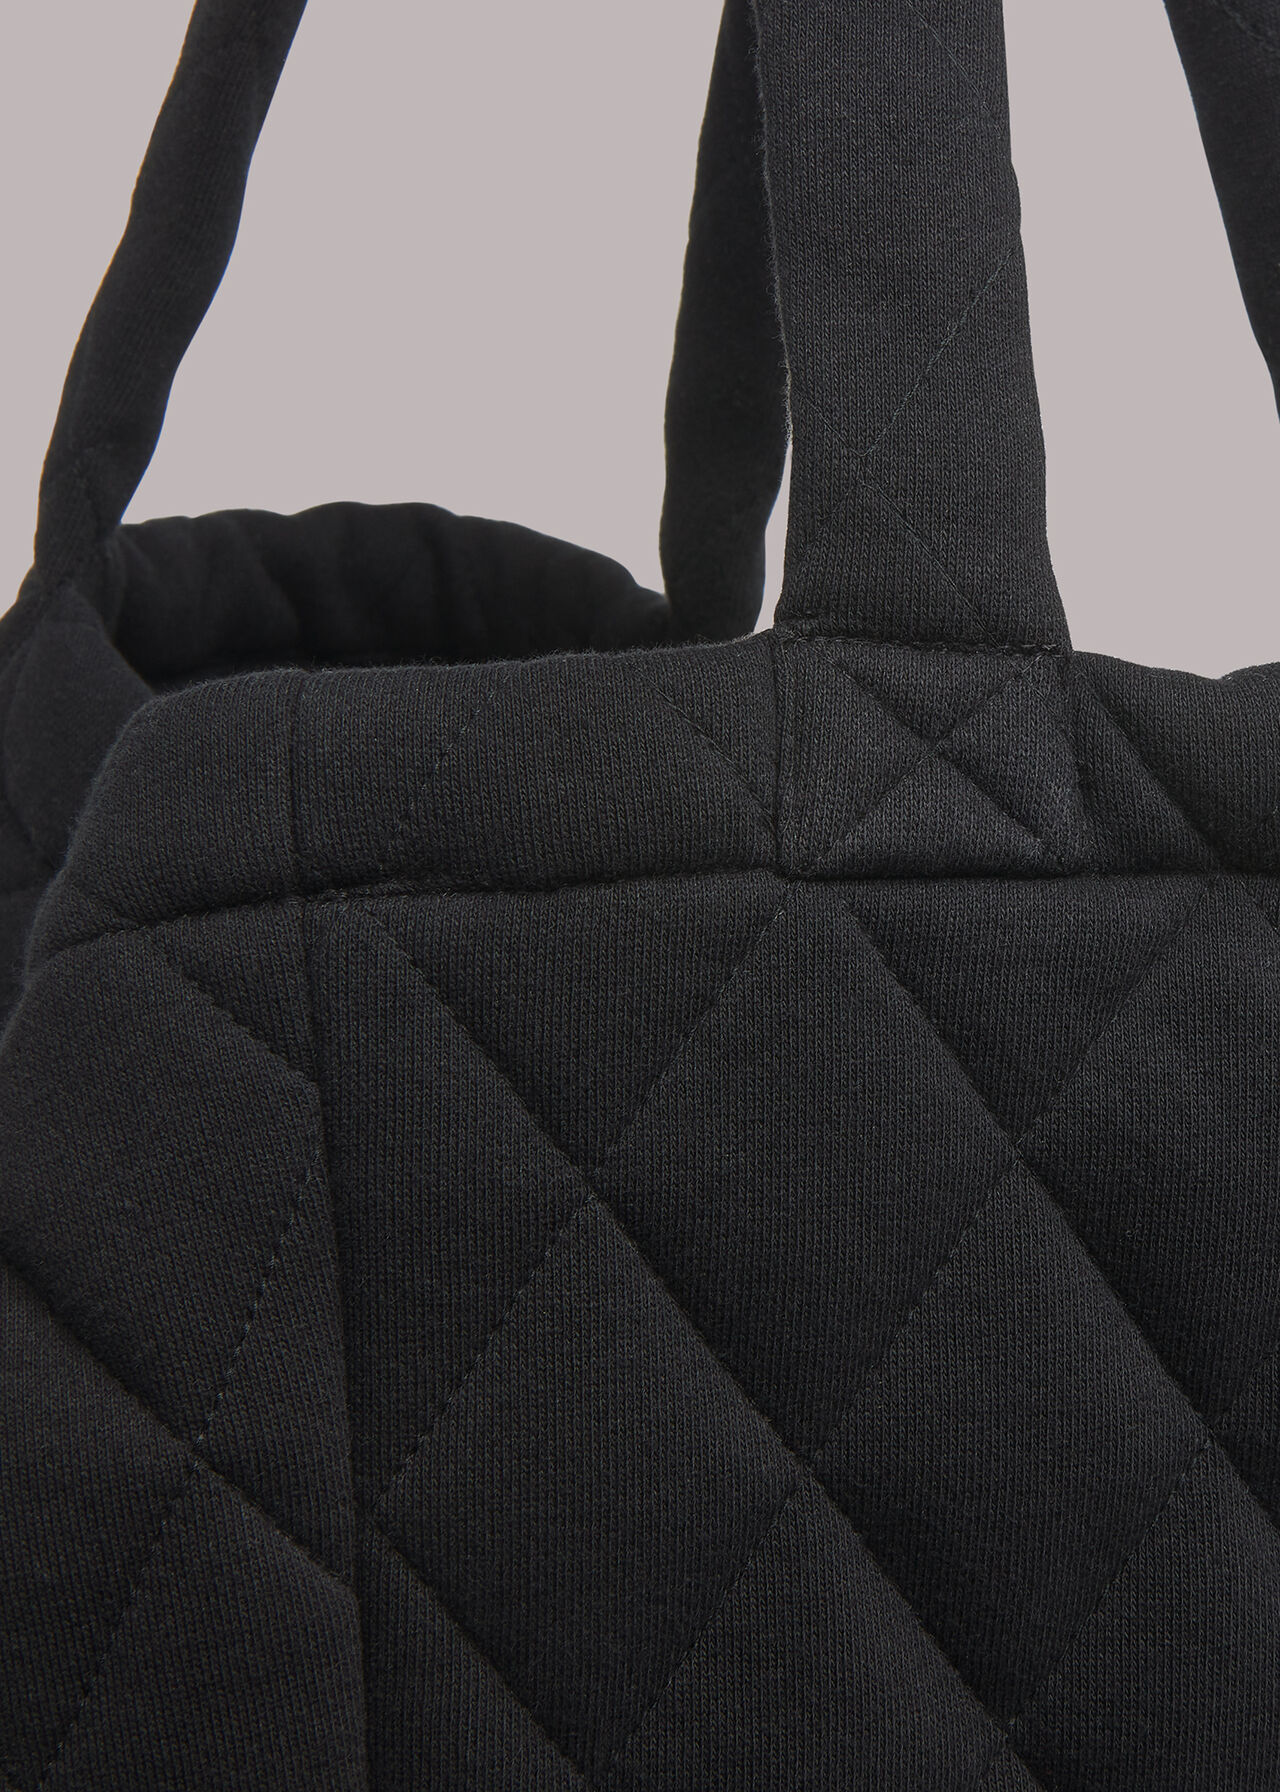 Lyle Quilted Tote Bag